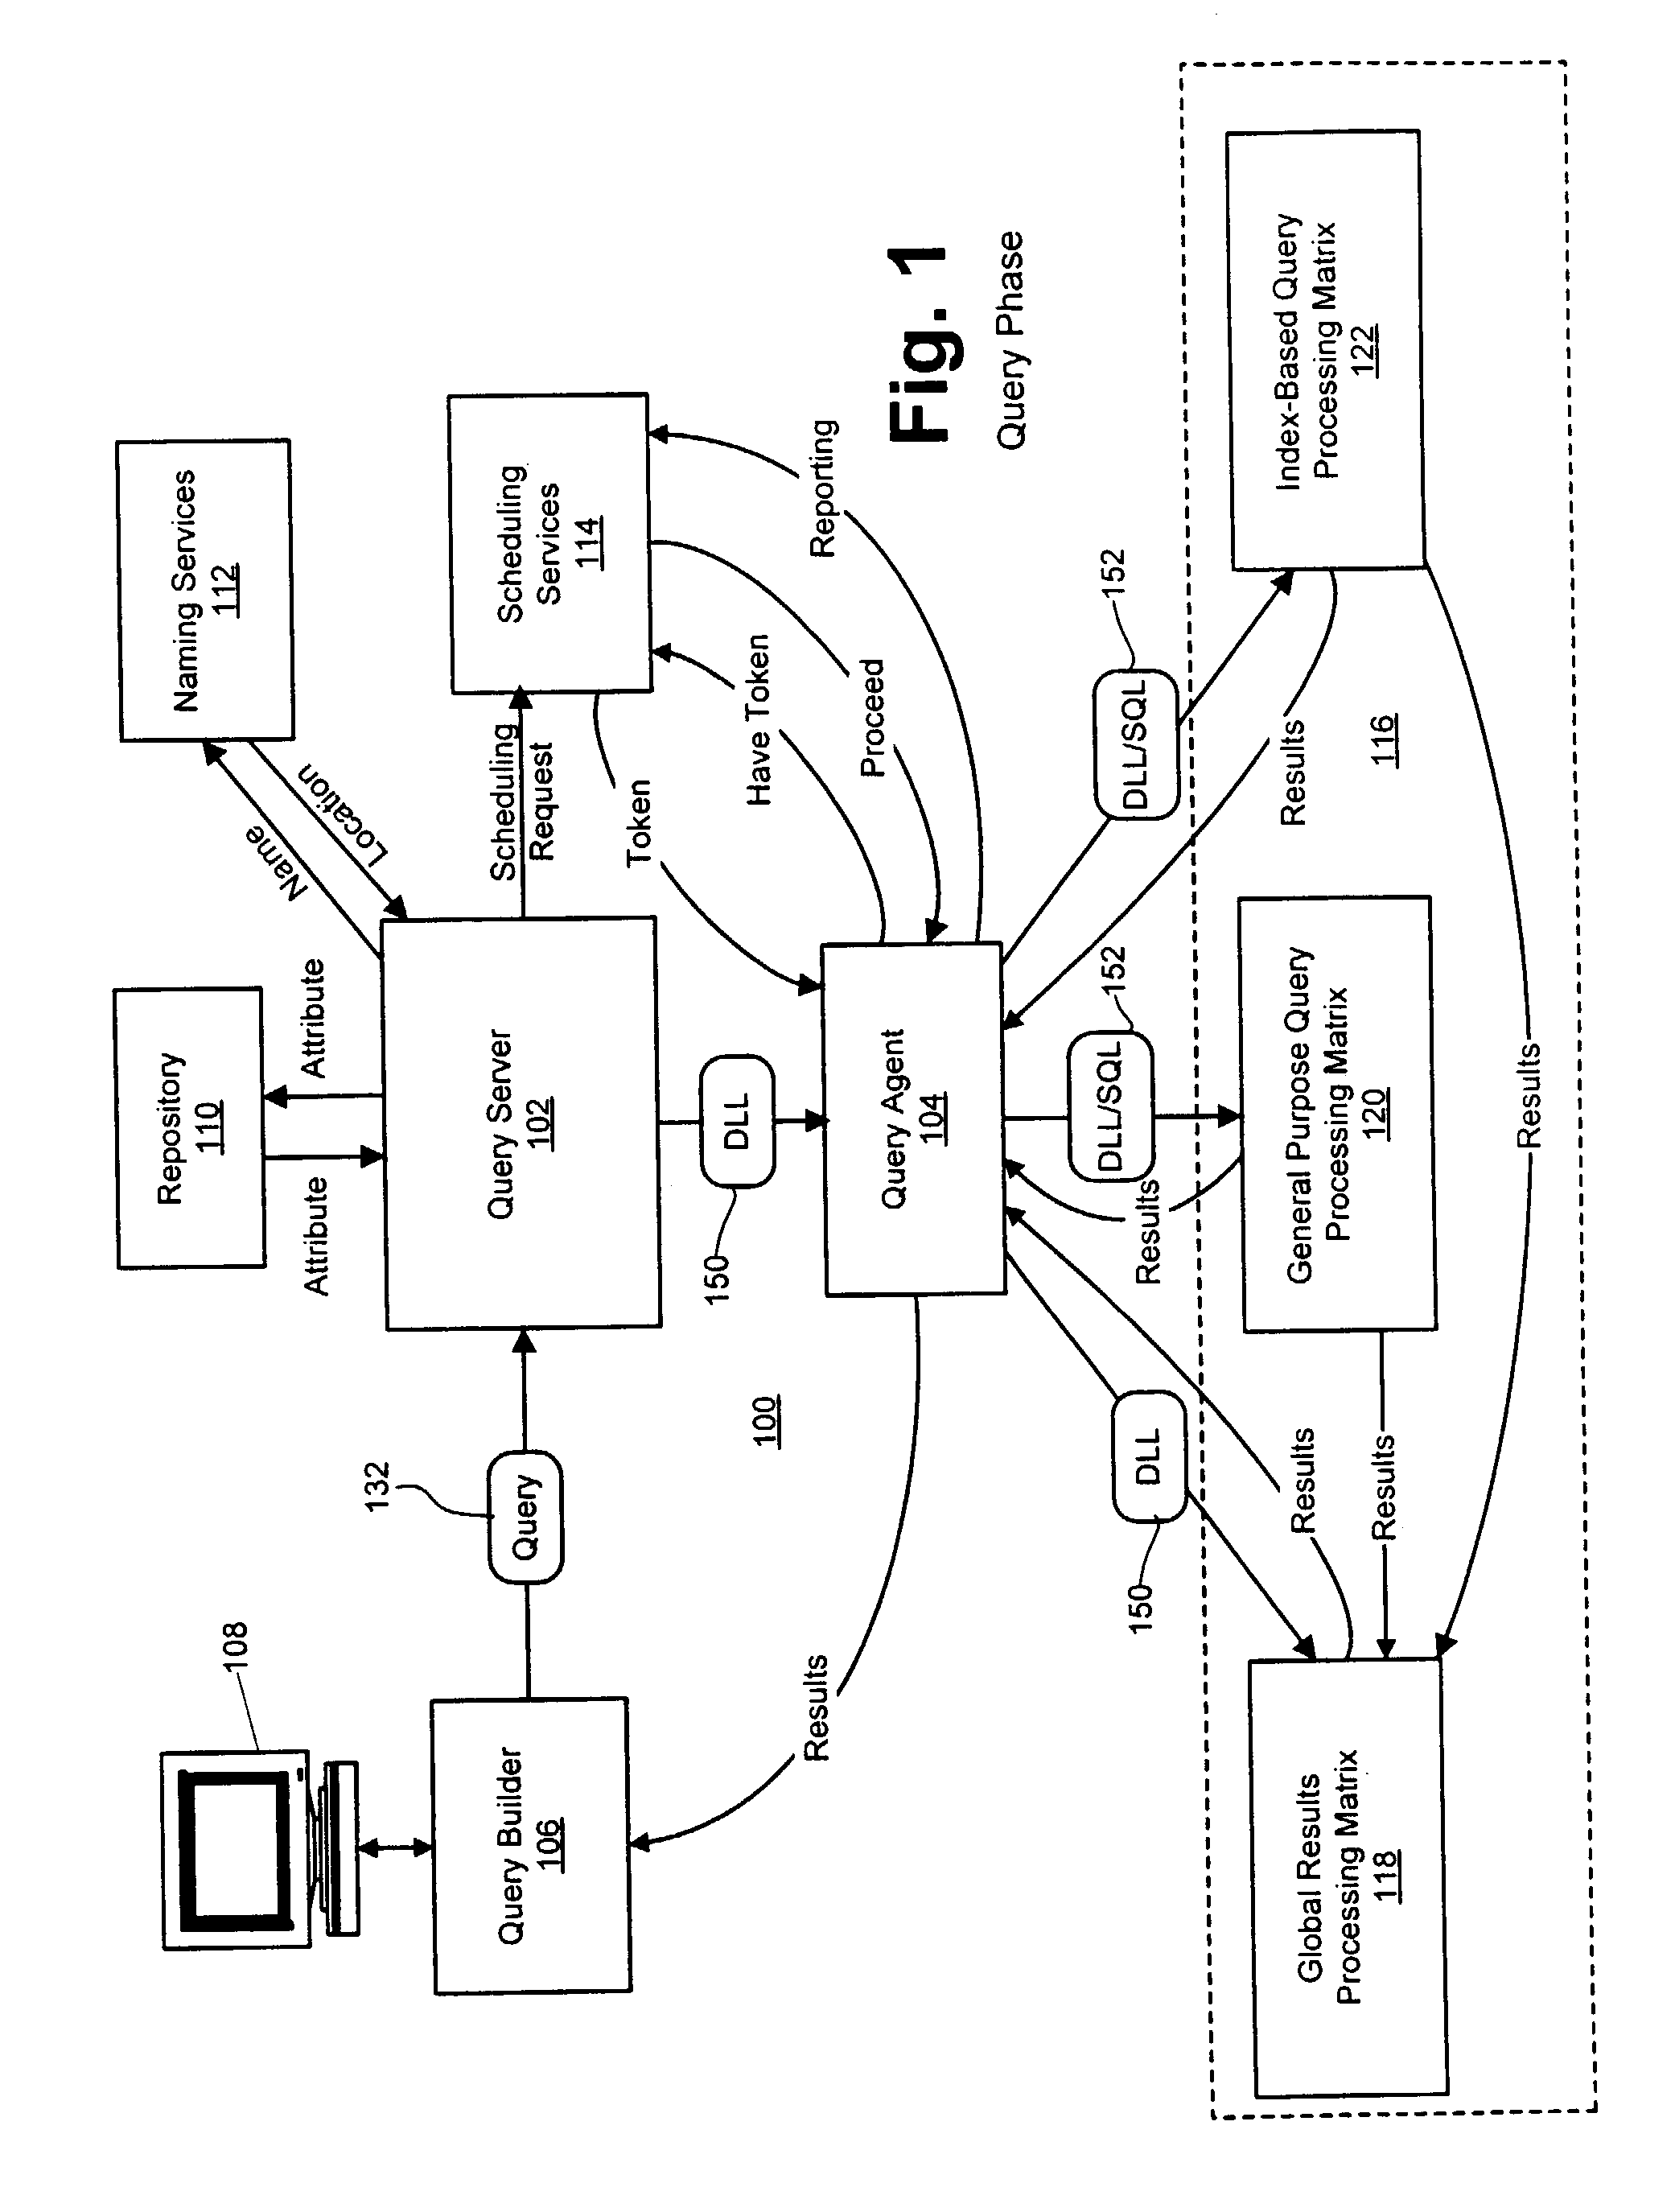 Method for sorting and distributing data among a plurality of nodes